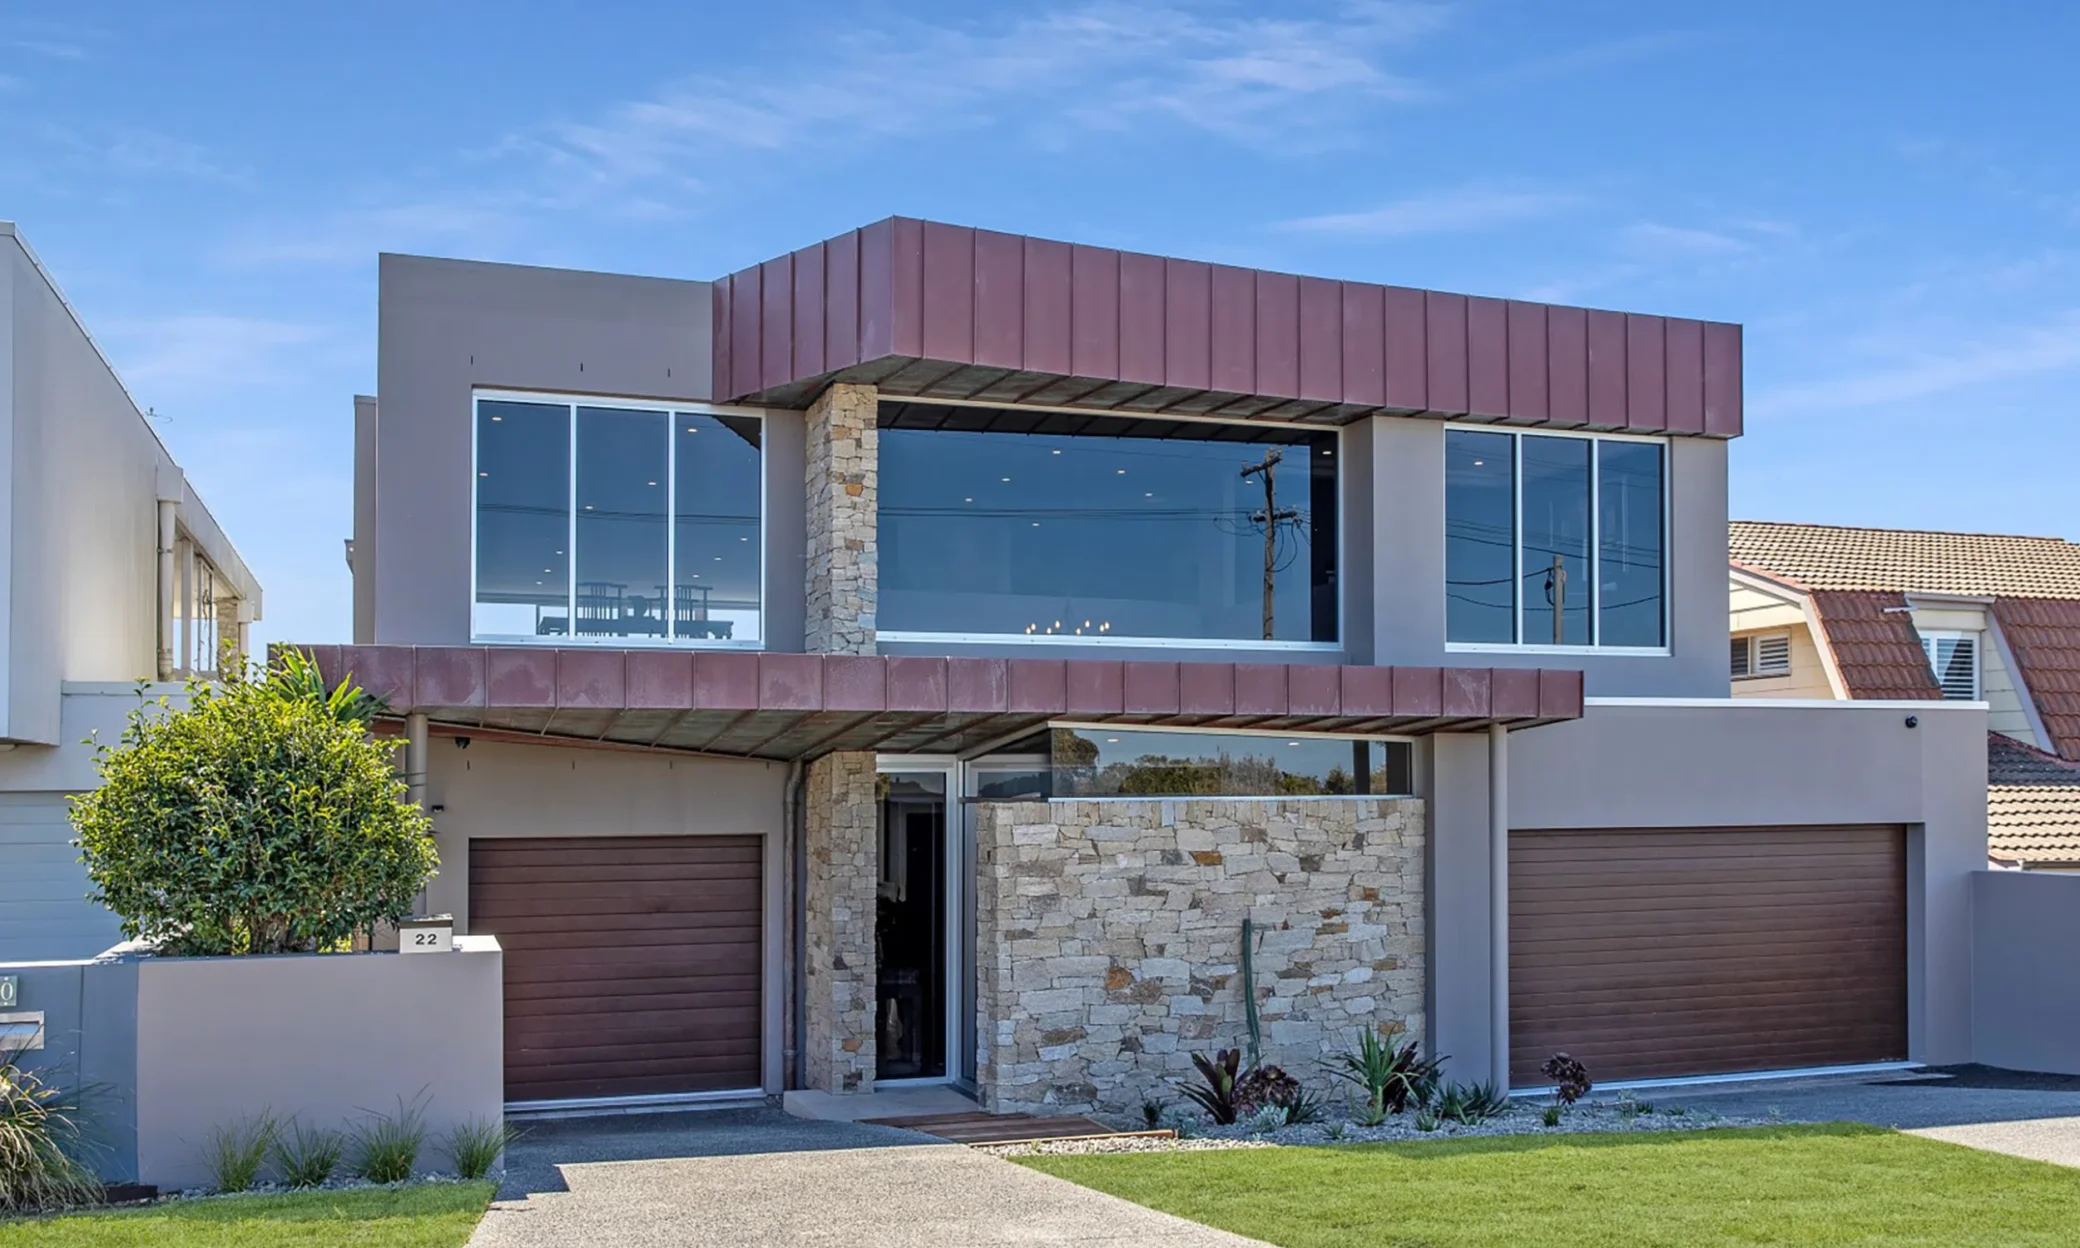 Modern two-story house with a flat roof and large glass windows, located in Port Stephens. Features a reddish-brown upper facade, double garage doors, and a stone-clad entrance. Landsc